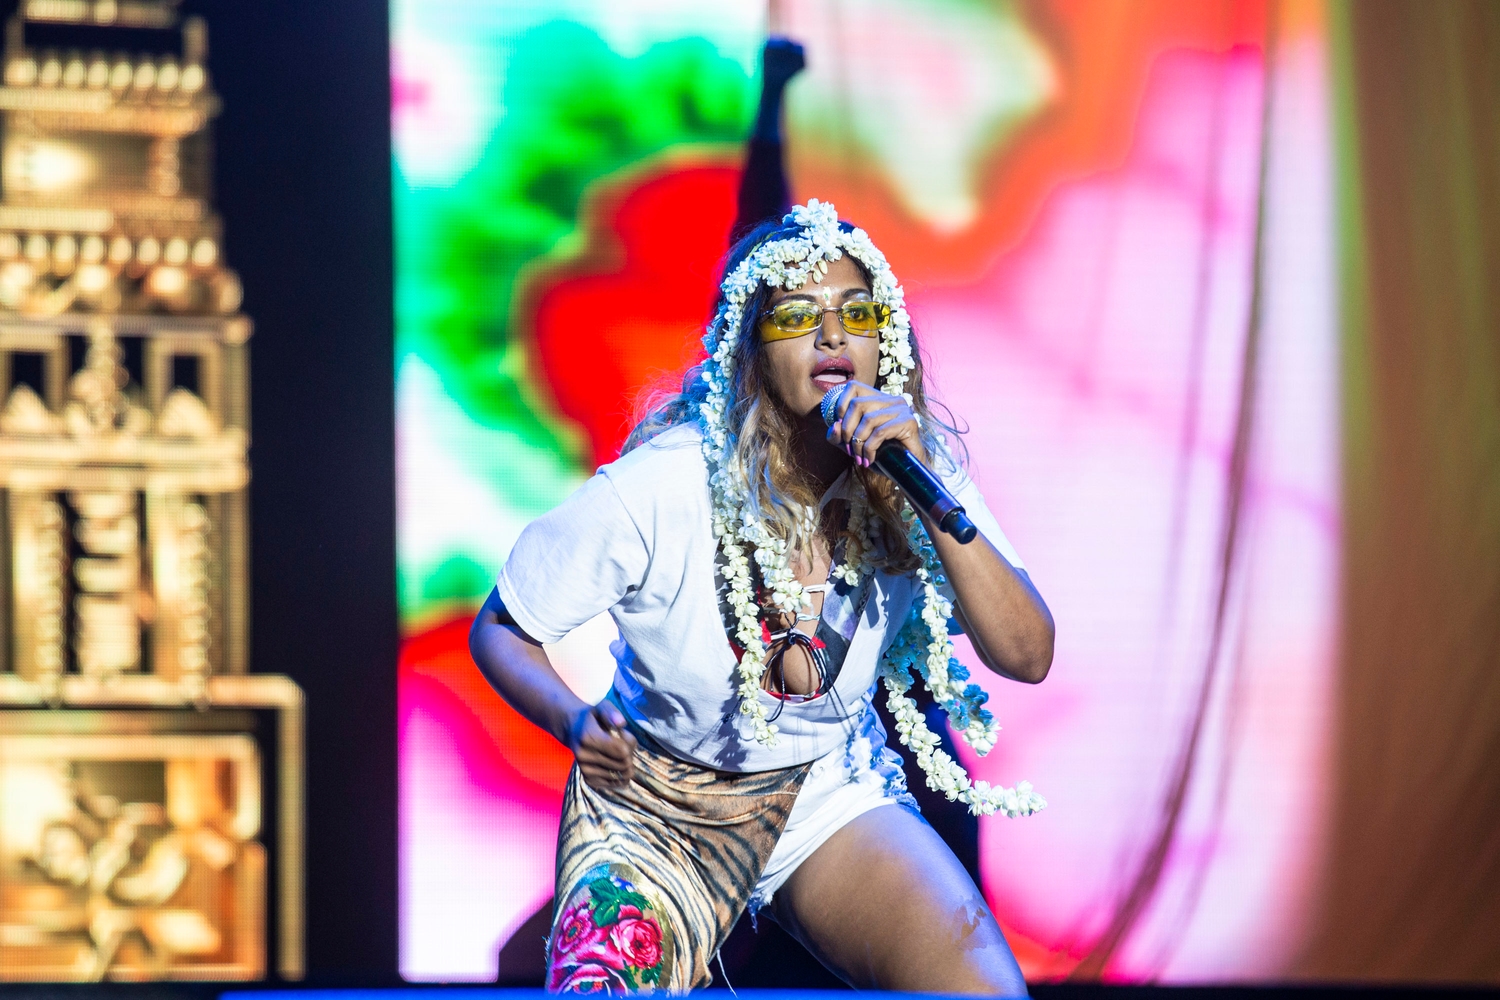 M.I.A. says she’s quitting music for a while